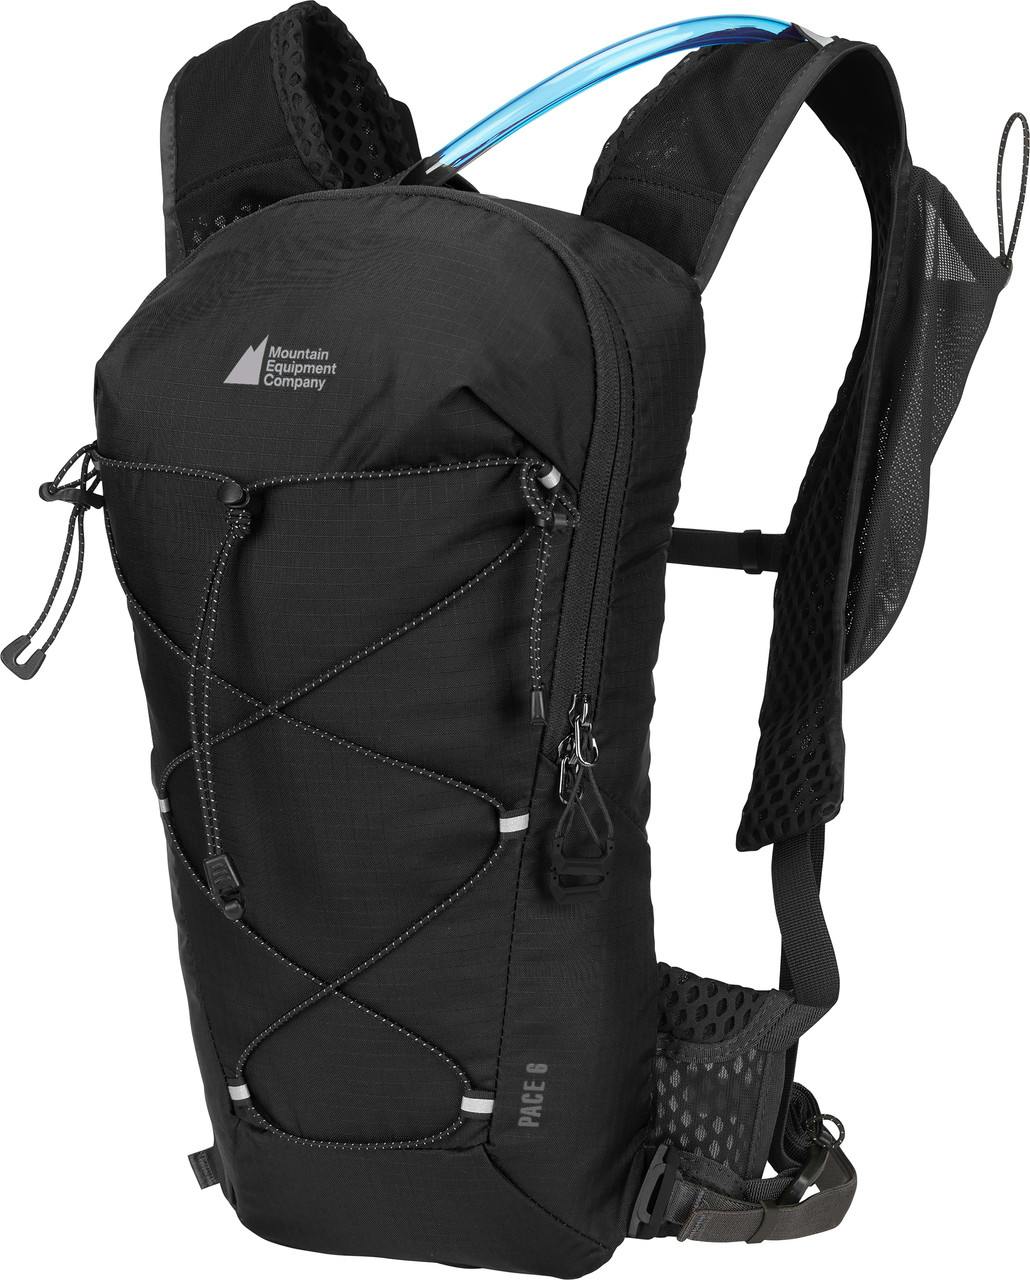 Pace 6 Hydration Pack Black